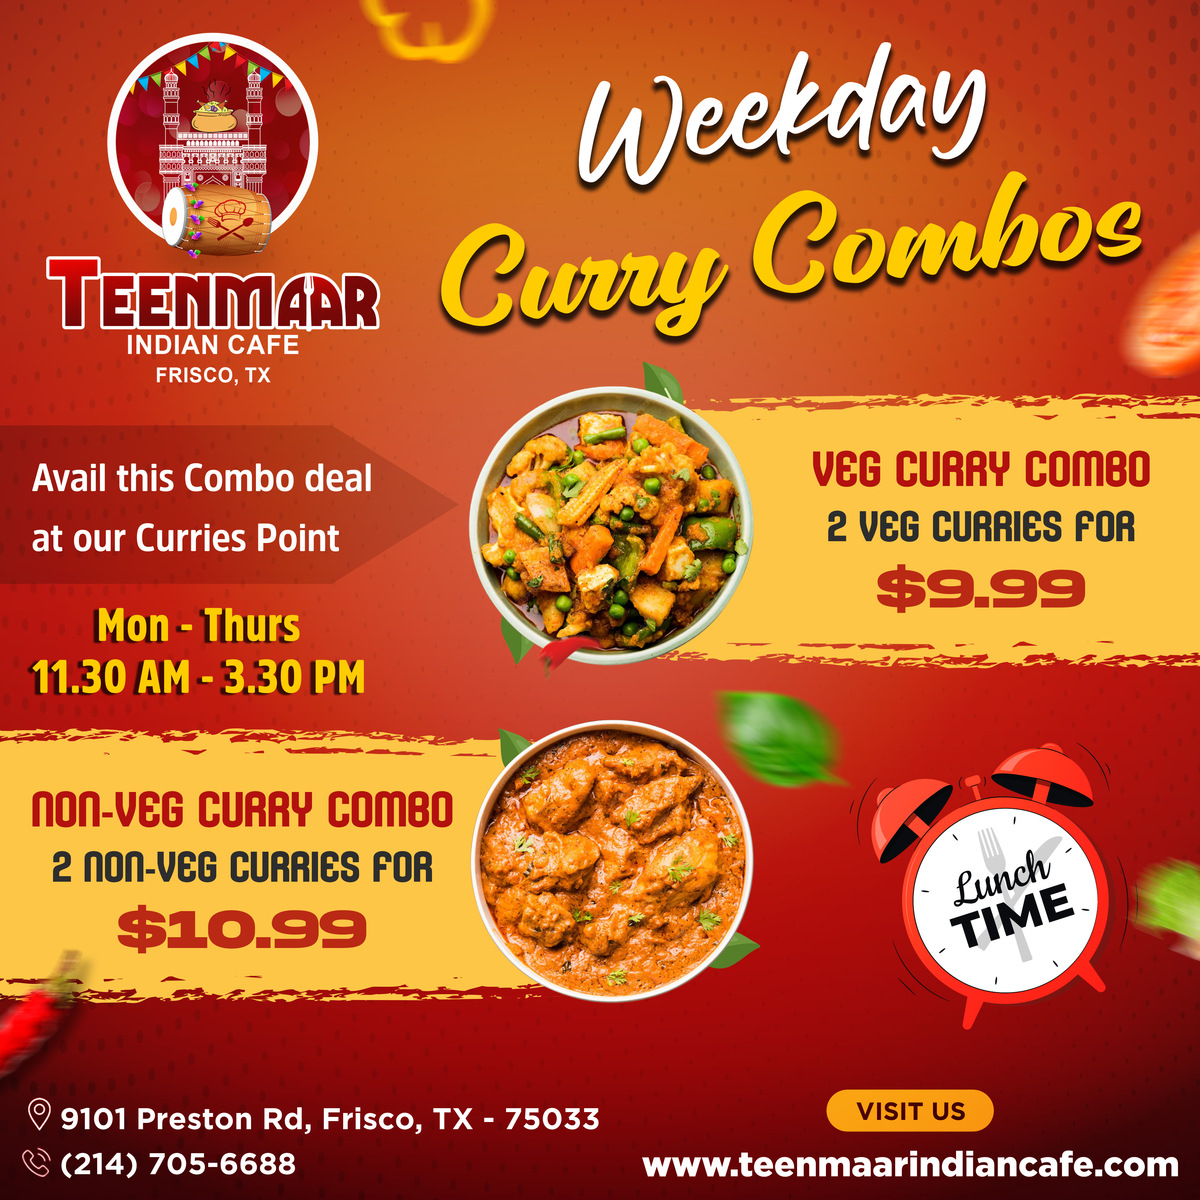 Weekday Curry Combos